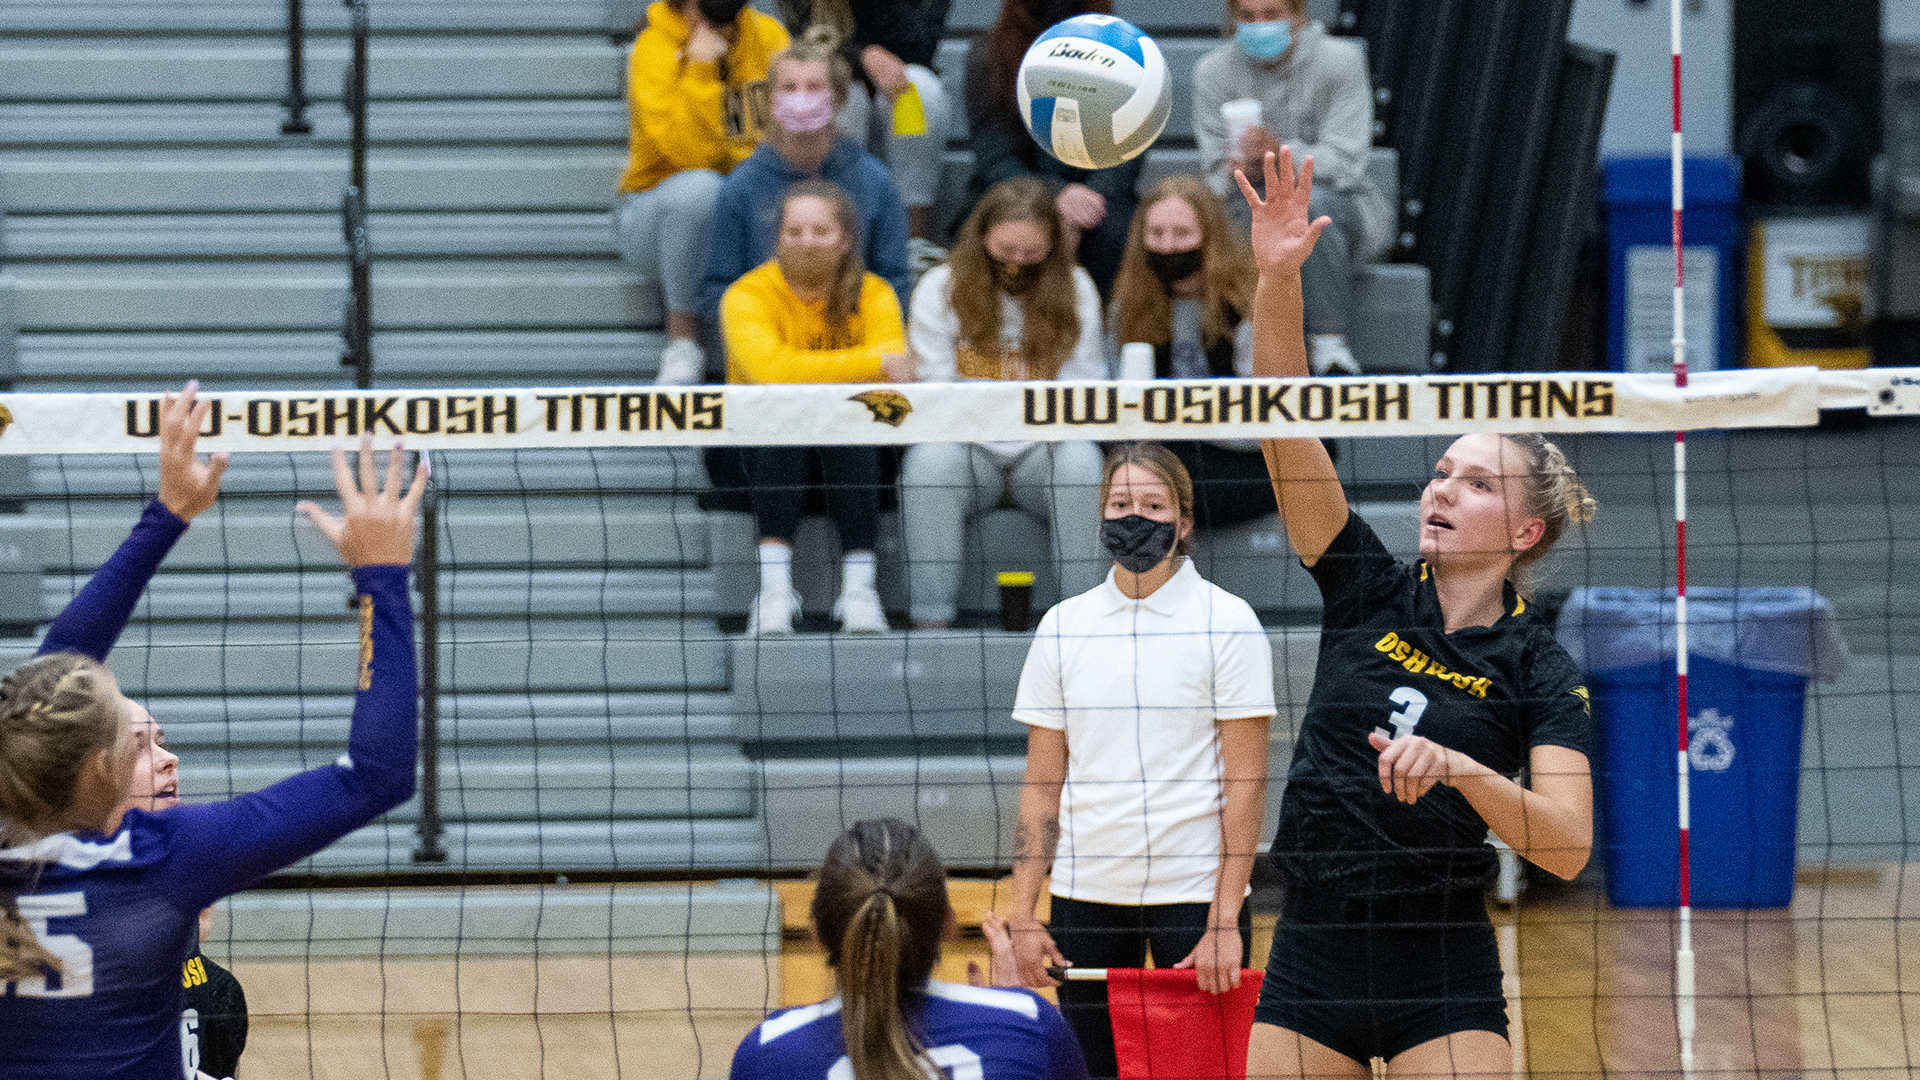 Carissa Sundholm hit .333 with eight kills, nine digs and a career high-tying four blocks against the Rams.